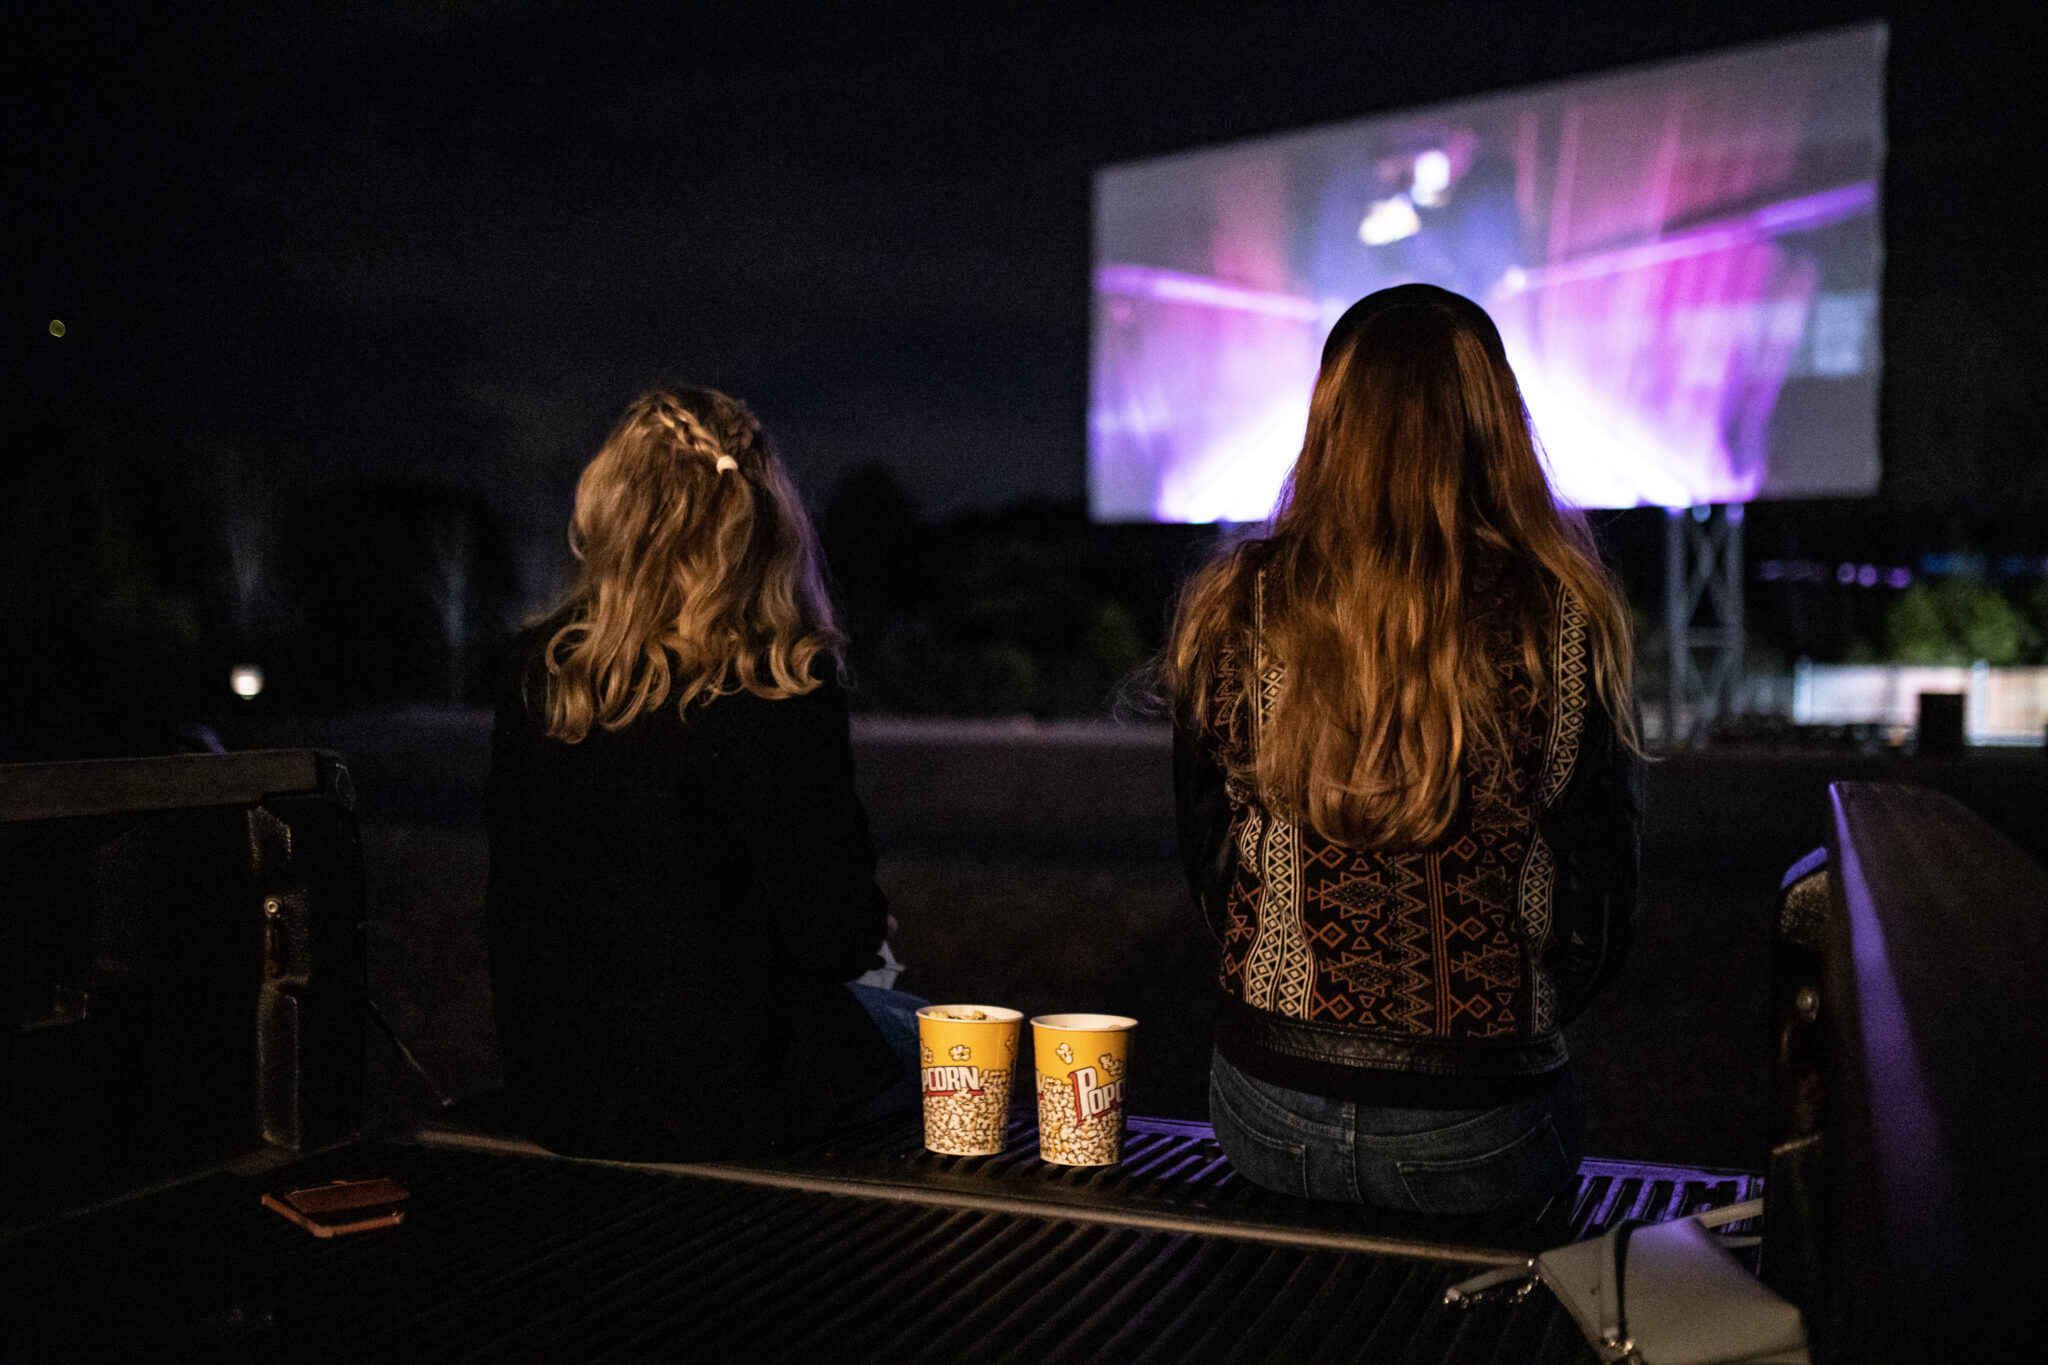 How to Drive-In to an unforgettable movie experience at Grand River